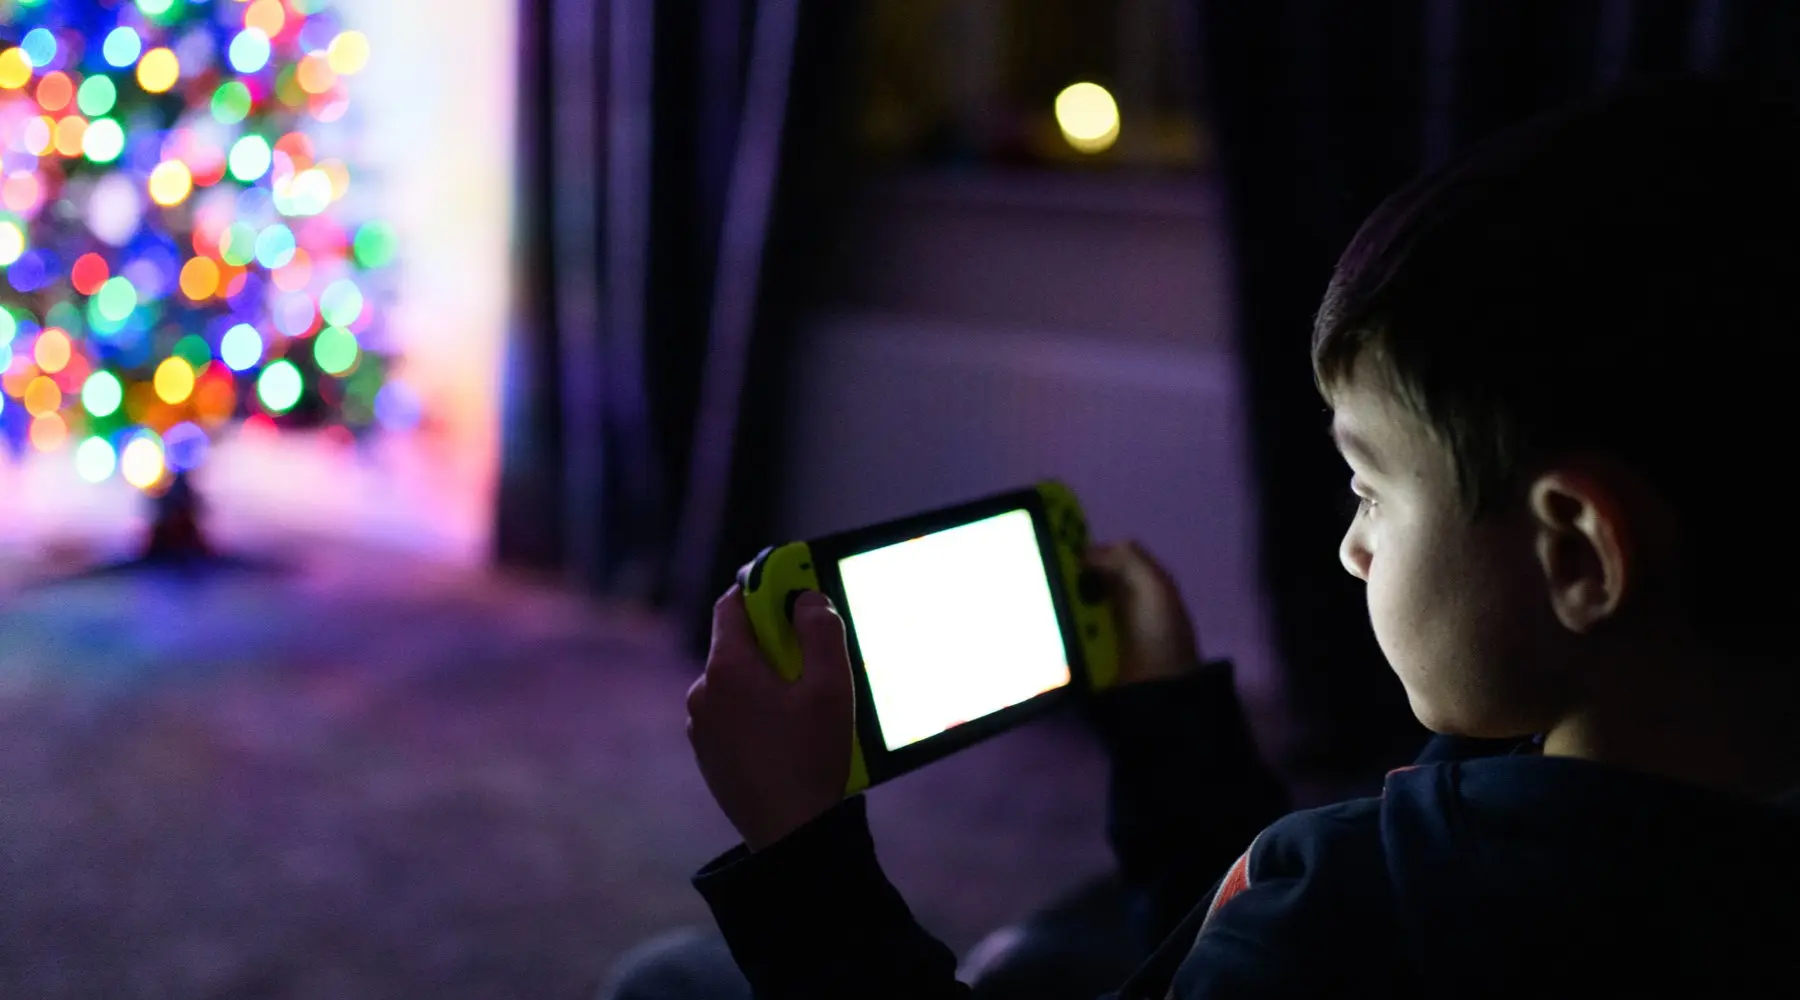 A child gaming by the light of the Christmas tree